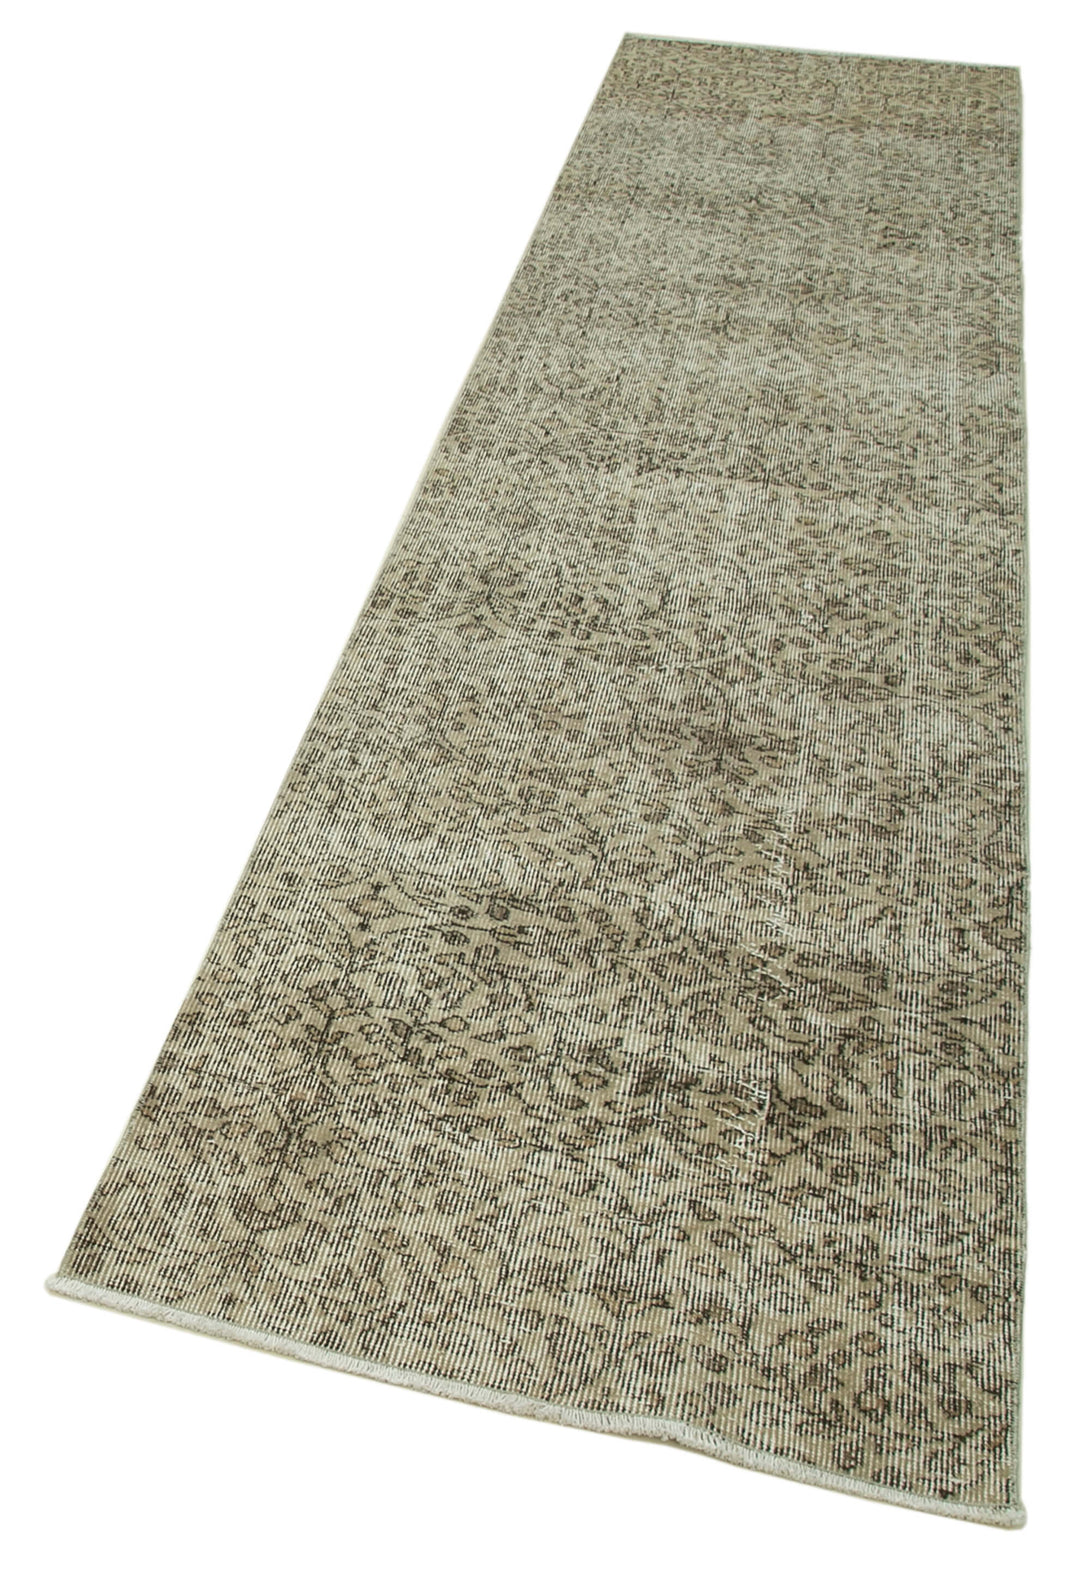 Handmade Overdyed Runner > Design# OL-AC-37188 > Size: 2'-6" x 10'-3", Carpet Culture Rugs, Handmade Rugs, NYC Rugs, New Rugs, Shop Rugs, Rug Store, Outlet Rugs, SoHo Rugs, Rugs in USA